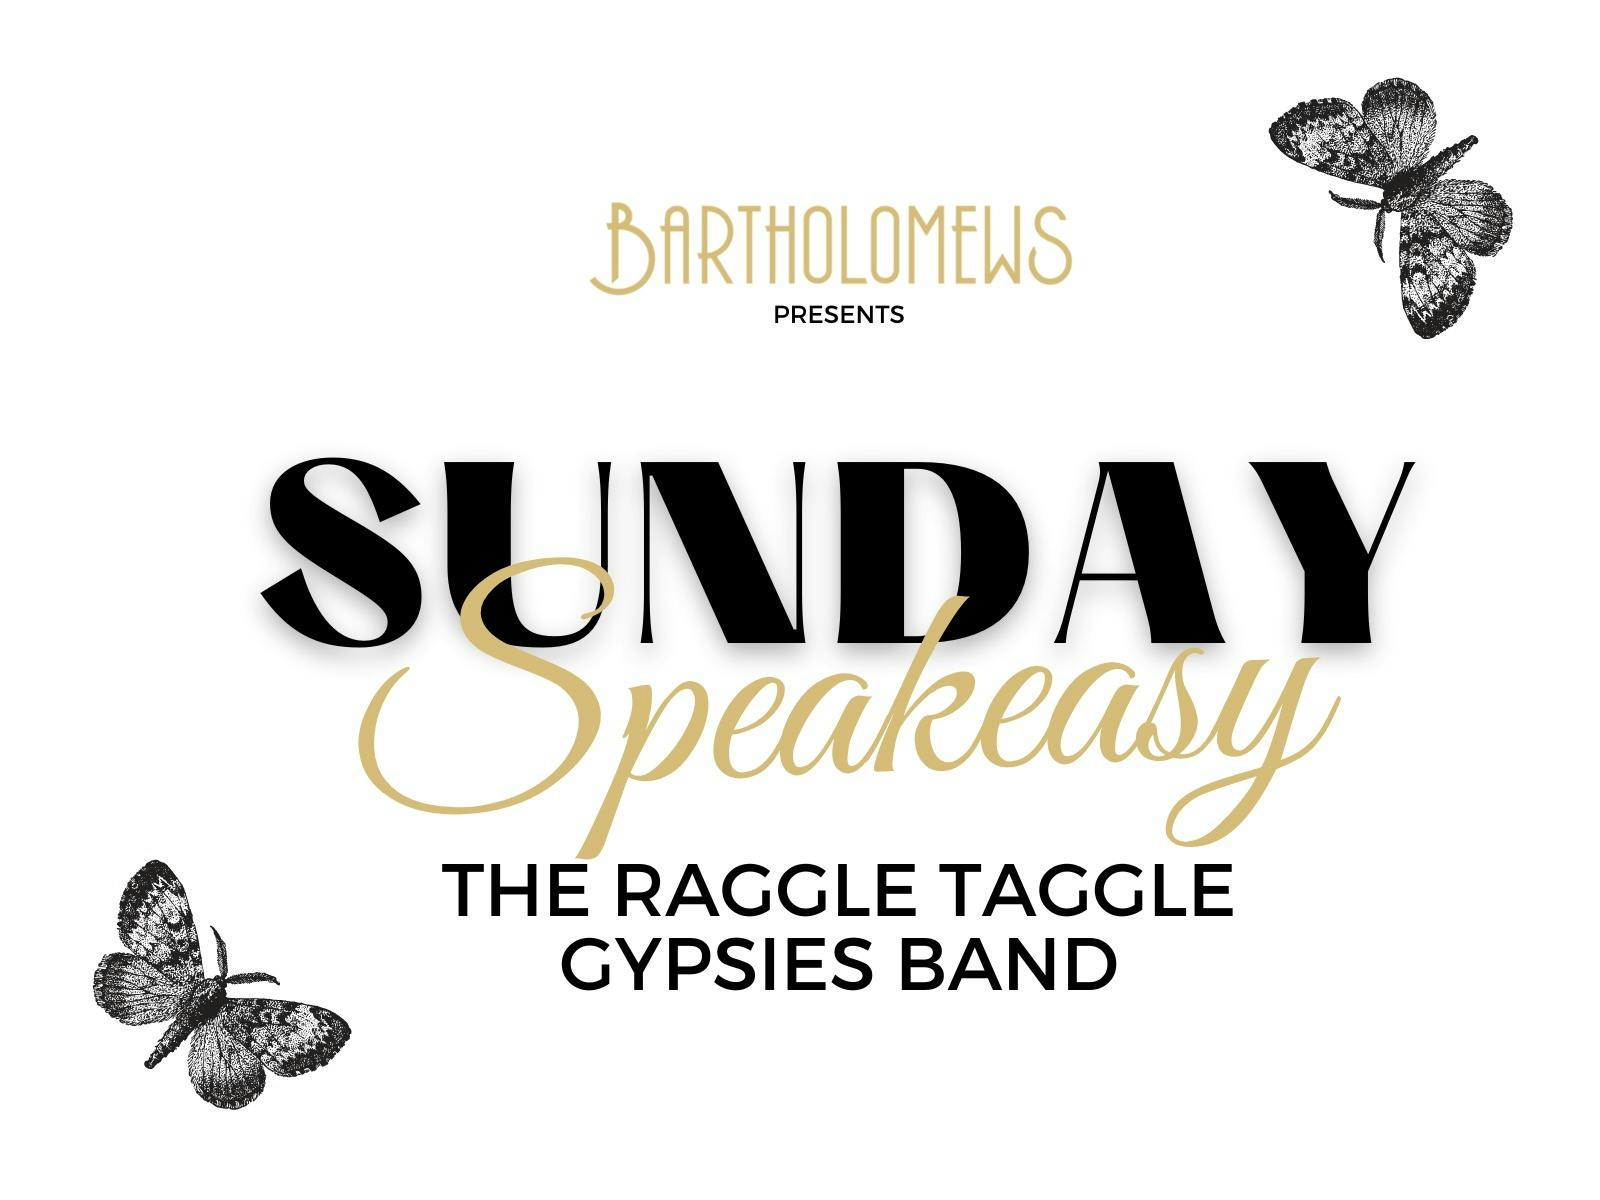 Sunday Speakeasy with The Raggle Taggle Gypsies Band